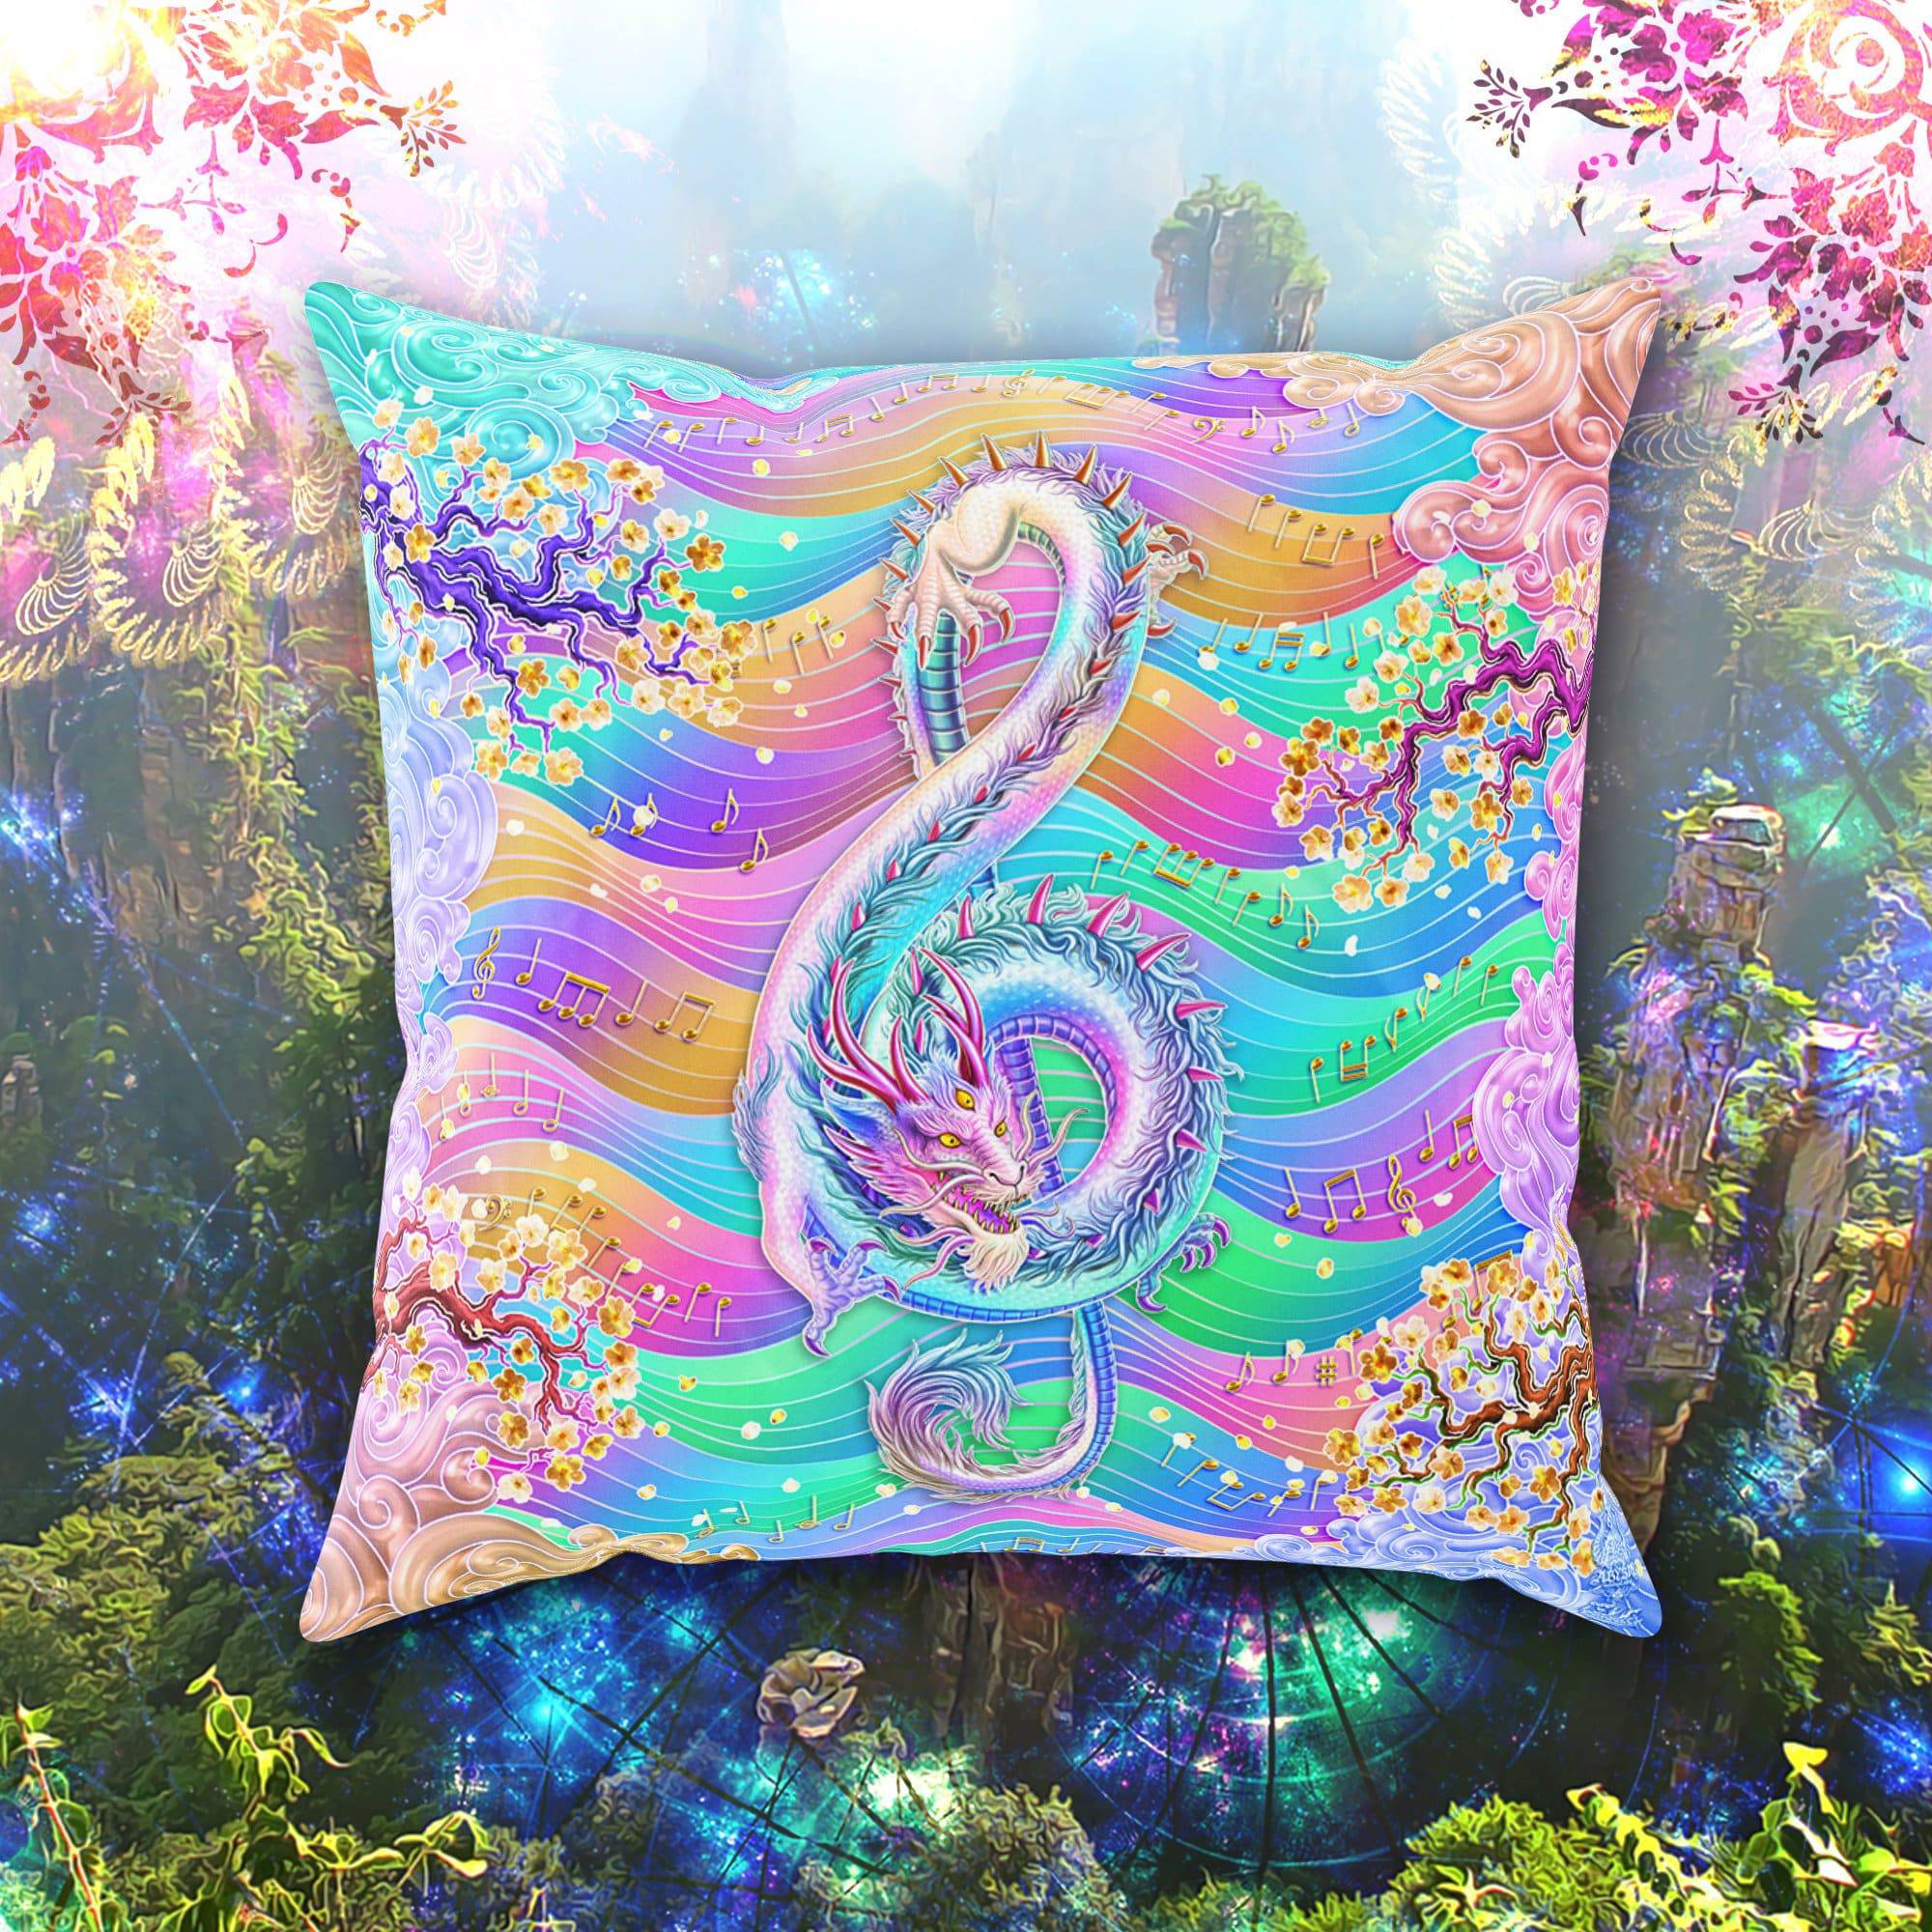 Holographic Throw Pillow, Decorative Accent Cushion, Aesthetic Room Decor, Music Art, Fairy Kei and Yume Kawaii style, Funky and Eclectic Home - Treble Clef, Pastel Dragon - Abysm Internal